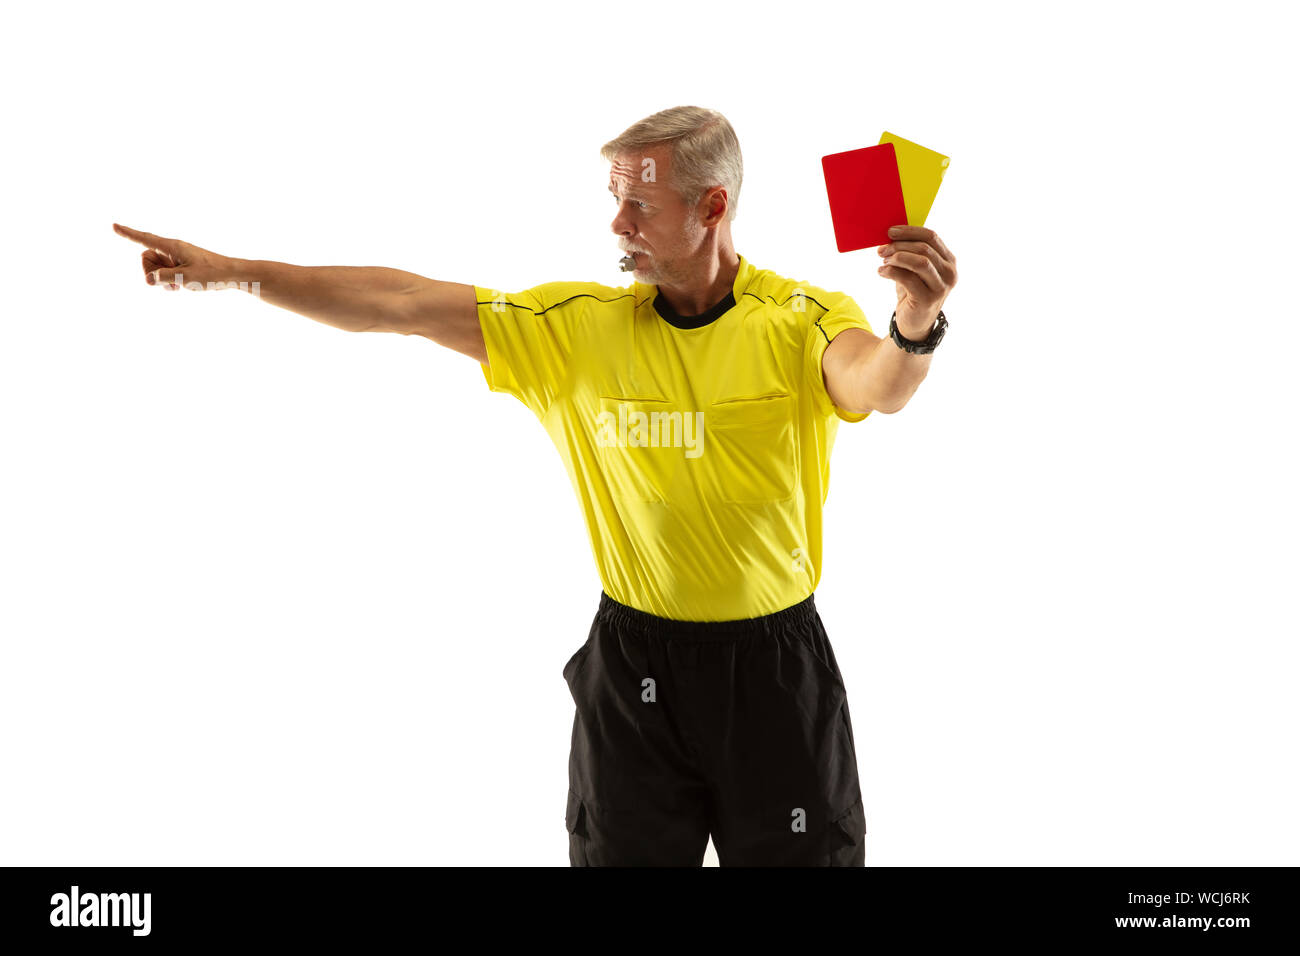 Referee showing a red and yellow cards to a football or soccer player while gaming on white studio background. Concept of sport, rules violation, controversial issues, obstacles overcoming. Stock Photo